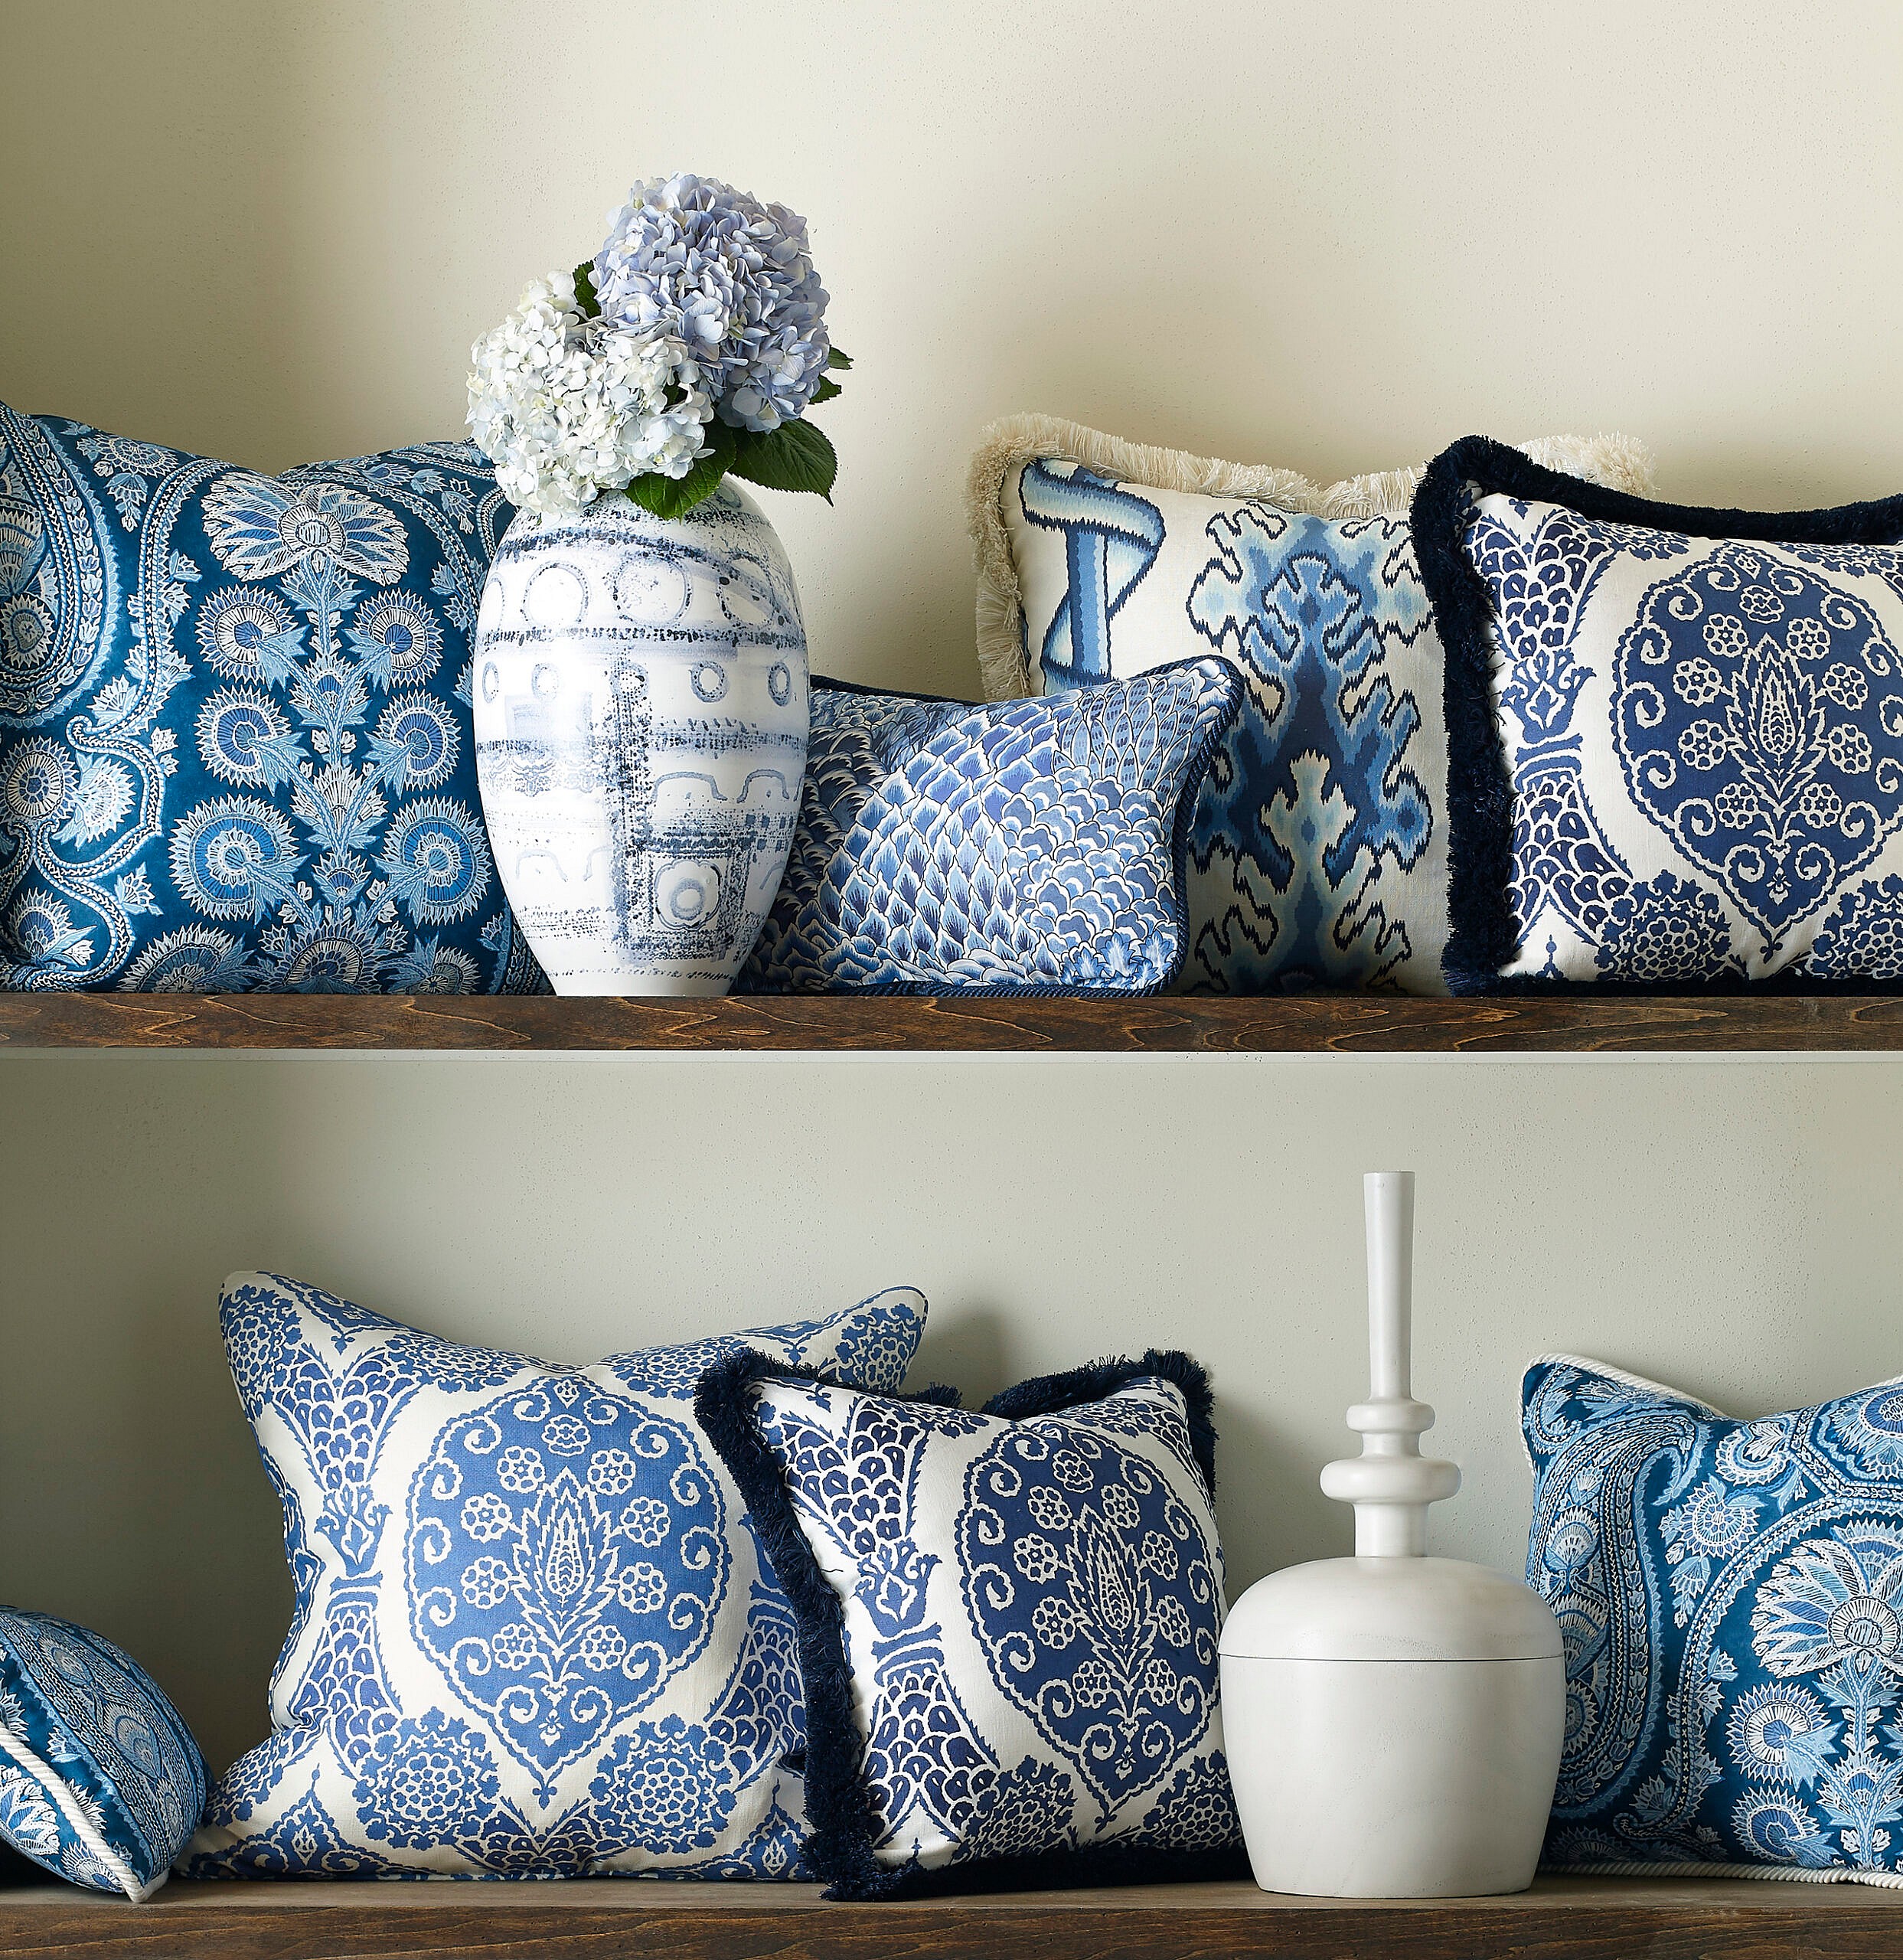 Cushions in fabrics from Brunschwig & Fils' Grand bazaar collection